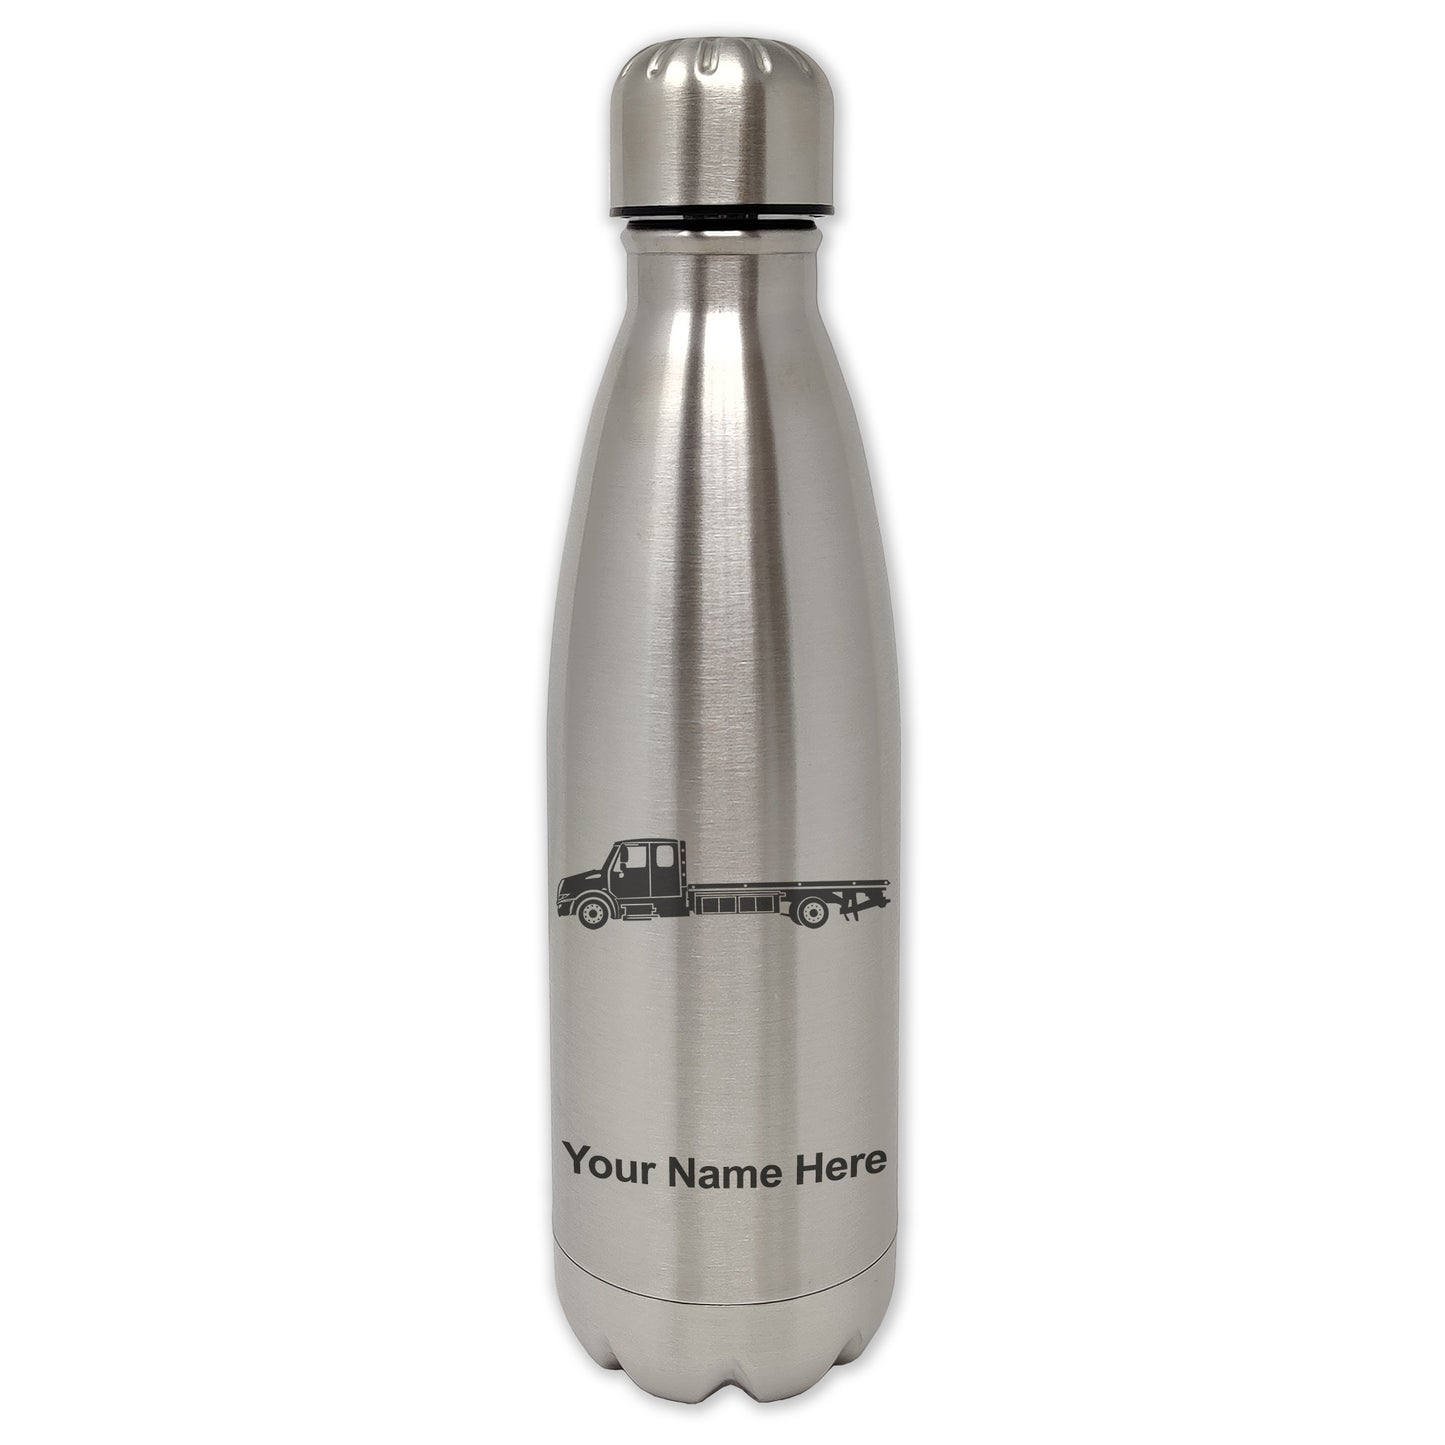 LaserGram Single Wall Water Bottle, Flat Bed Tow Truck, Personalized Engraving Included